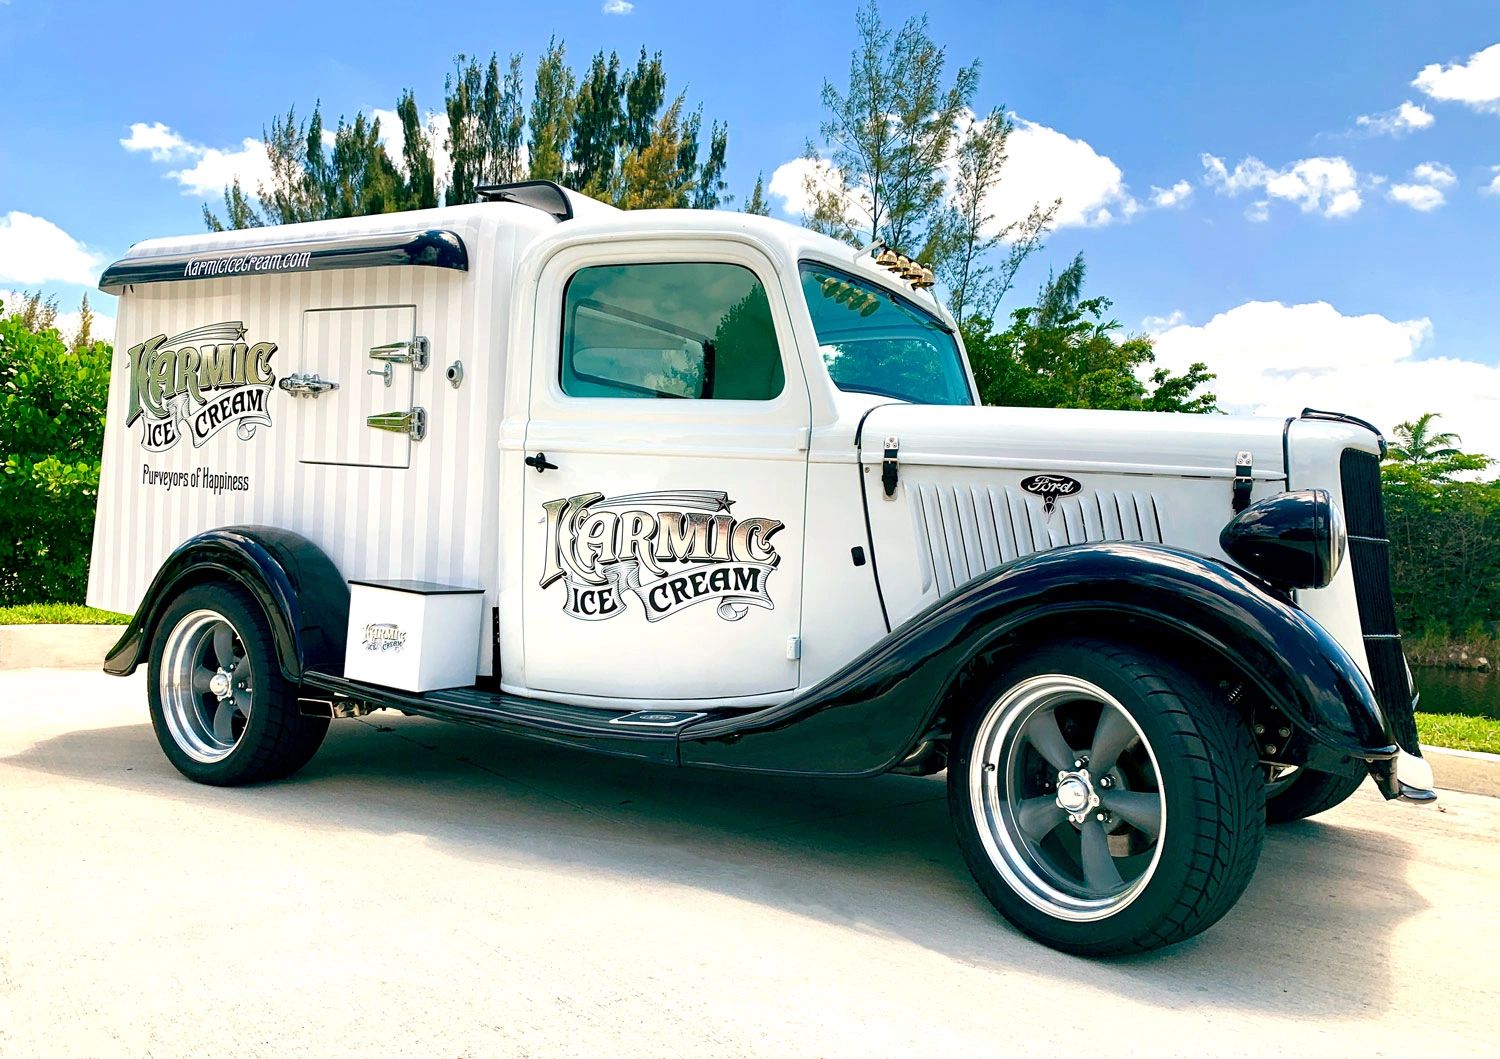 1935 Hot Rod Ice Cream truck rental in Broward, Dade and Palm Beach Counties